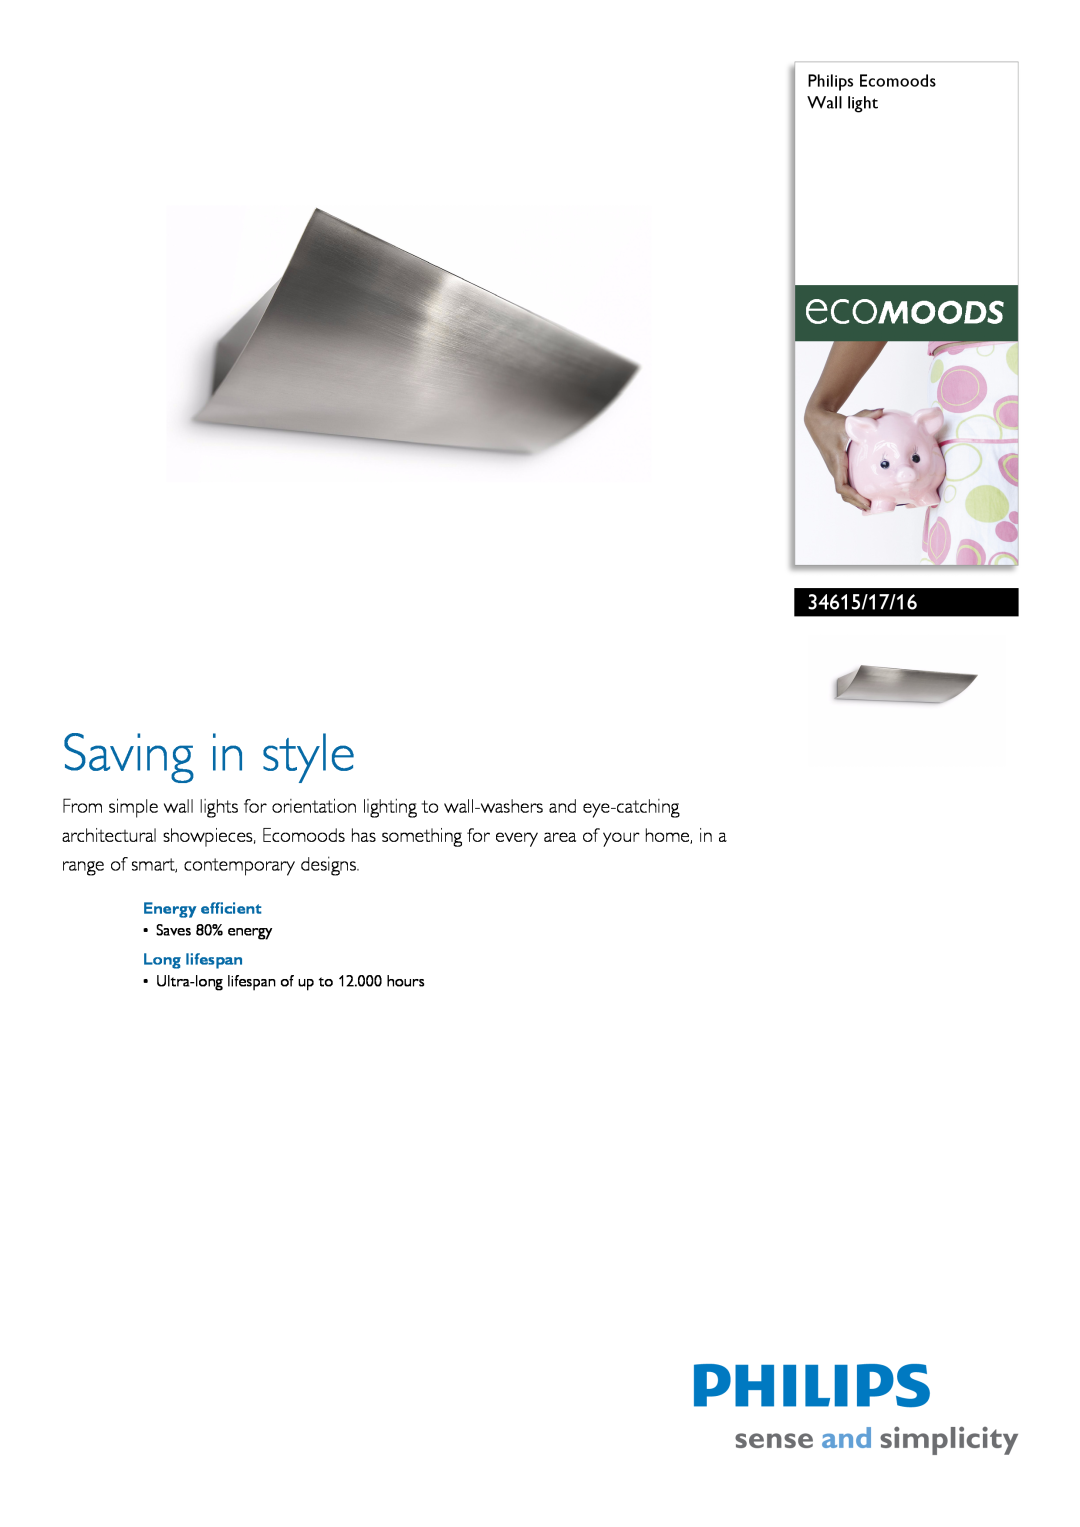 Philips 34615/17/16 manual Philips Ecomoods Wall light, Energy efficient, Long lifespan, Saving in style, Saves 80% energy 